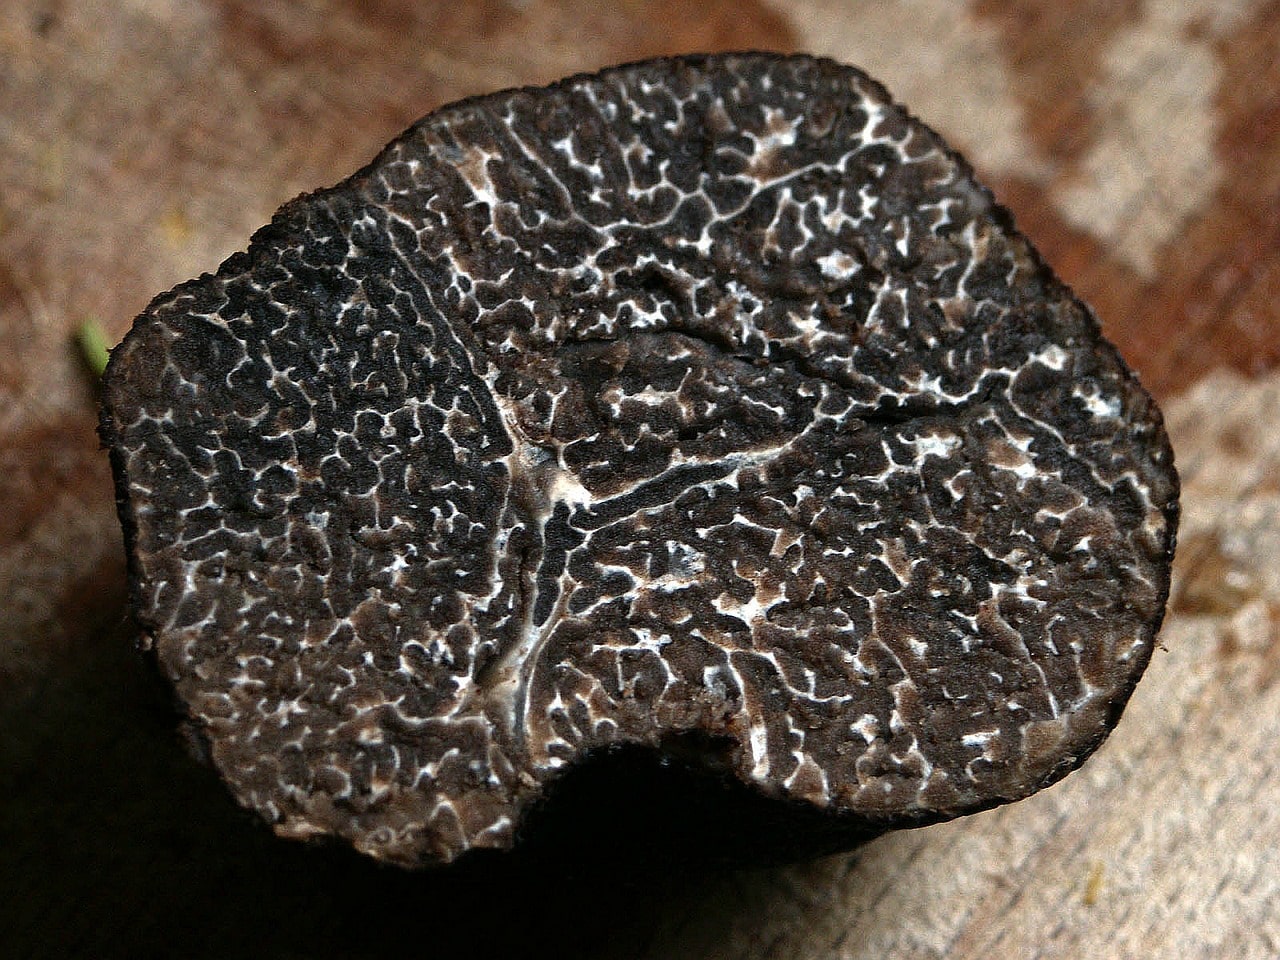 A cross-section of a black truffle on a wooden surface.